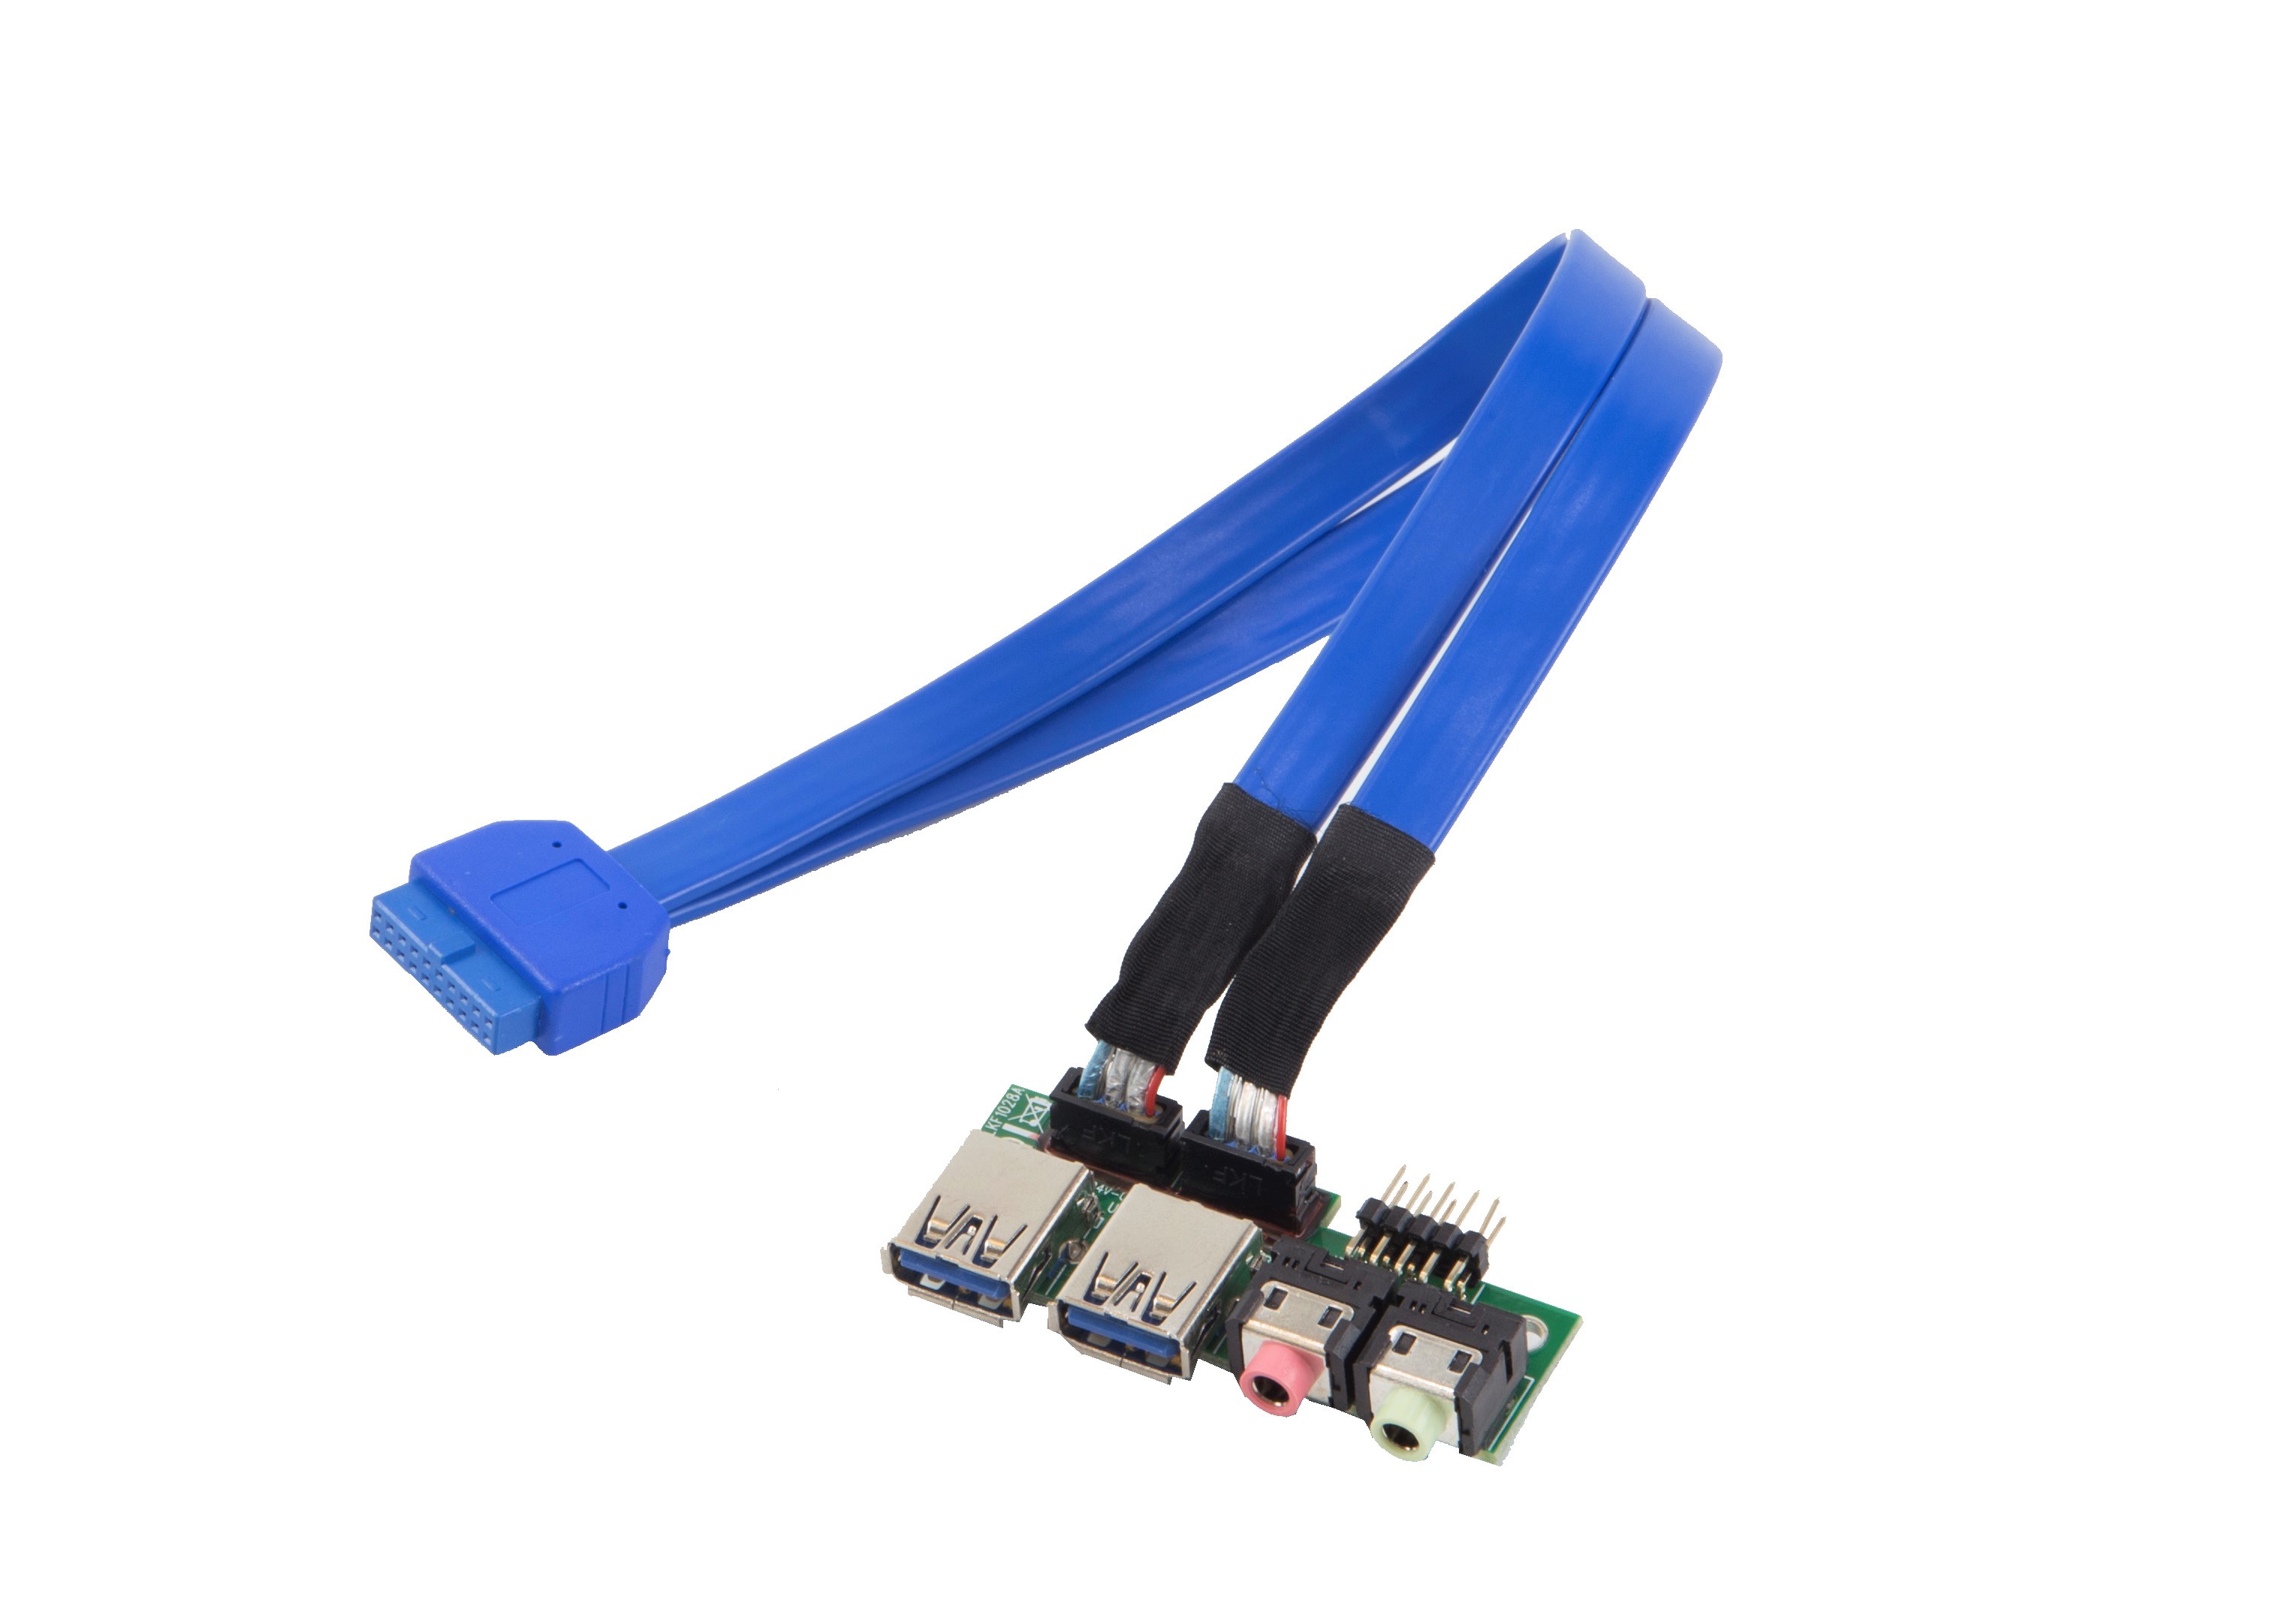 USB 3.0/HD AUDIO BOARD+300mm CABLE  |Products|Accessories|Others